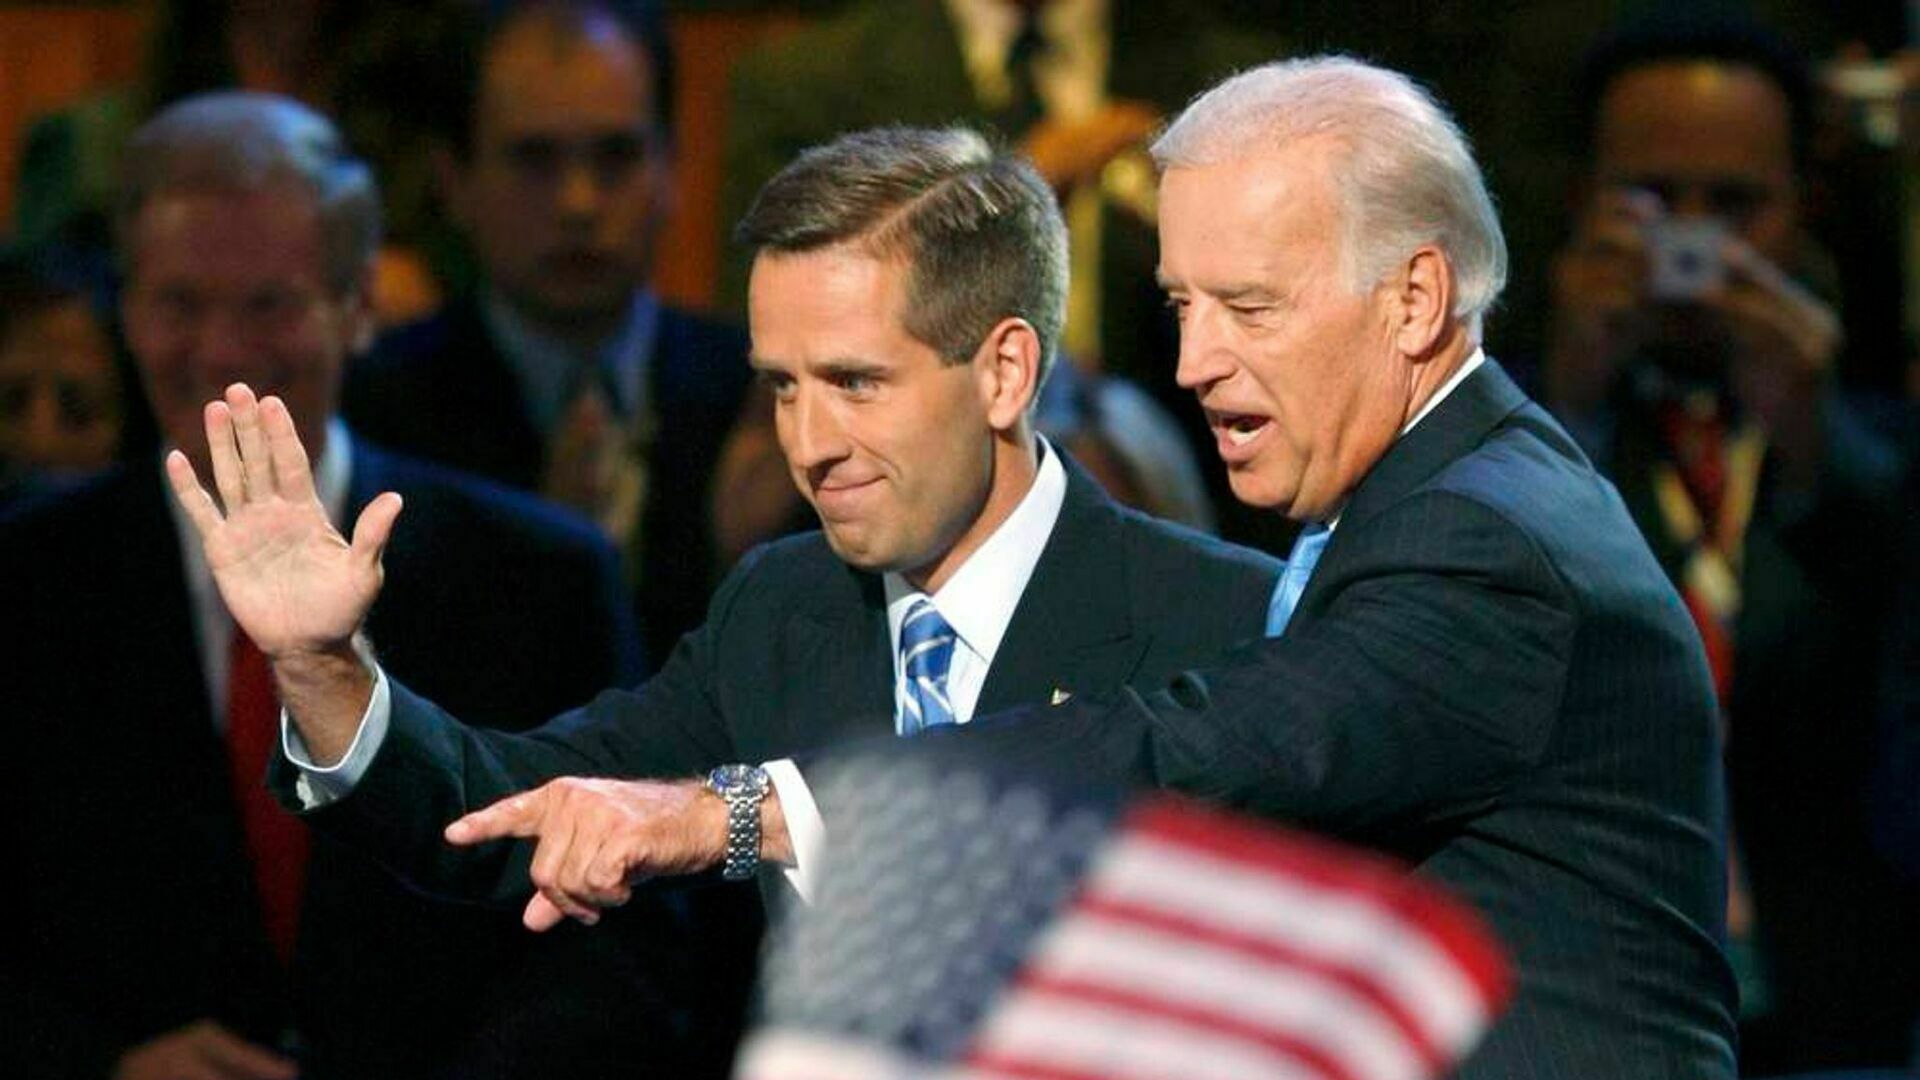 Fox News: Joe Biden Knew and Participated in his Son Hunter's Shenanigans